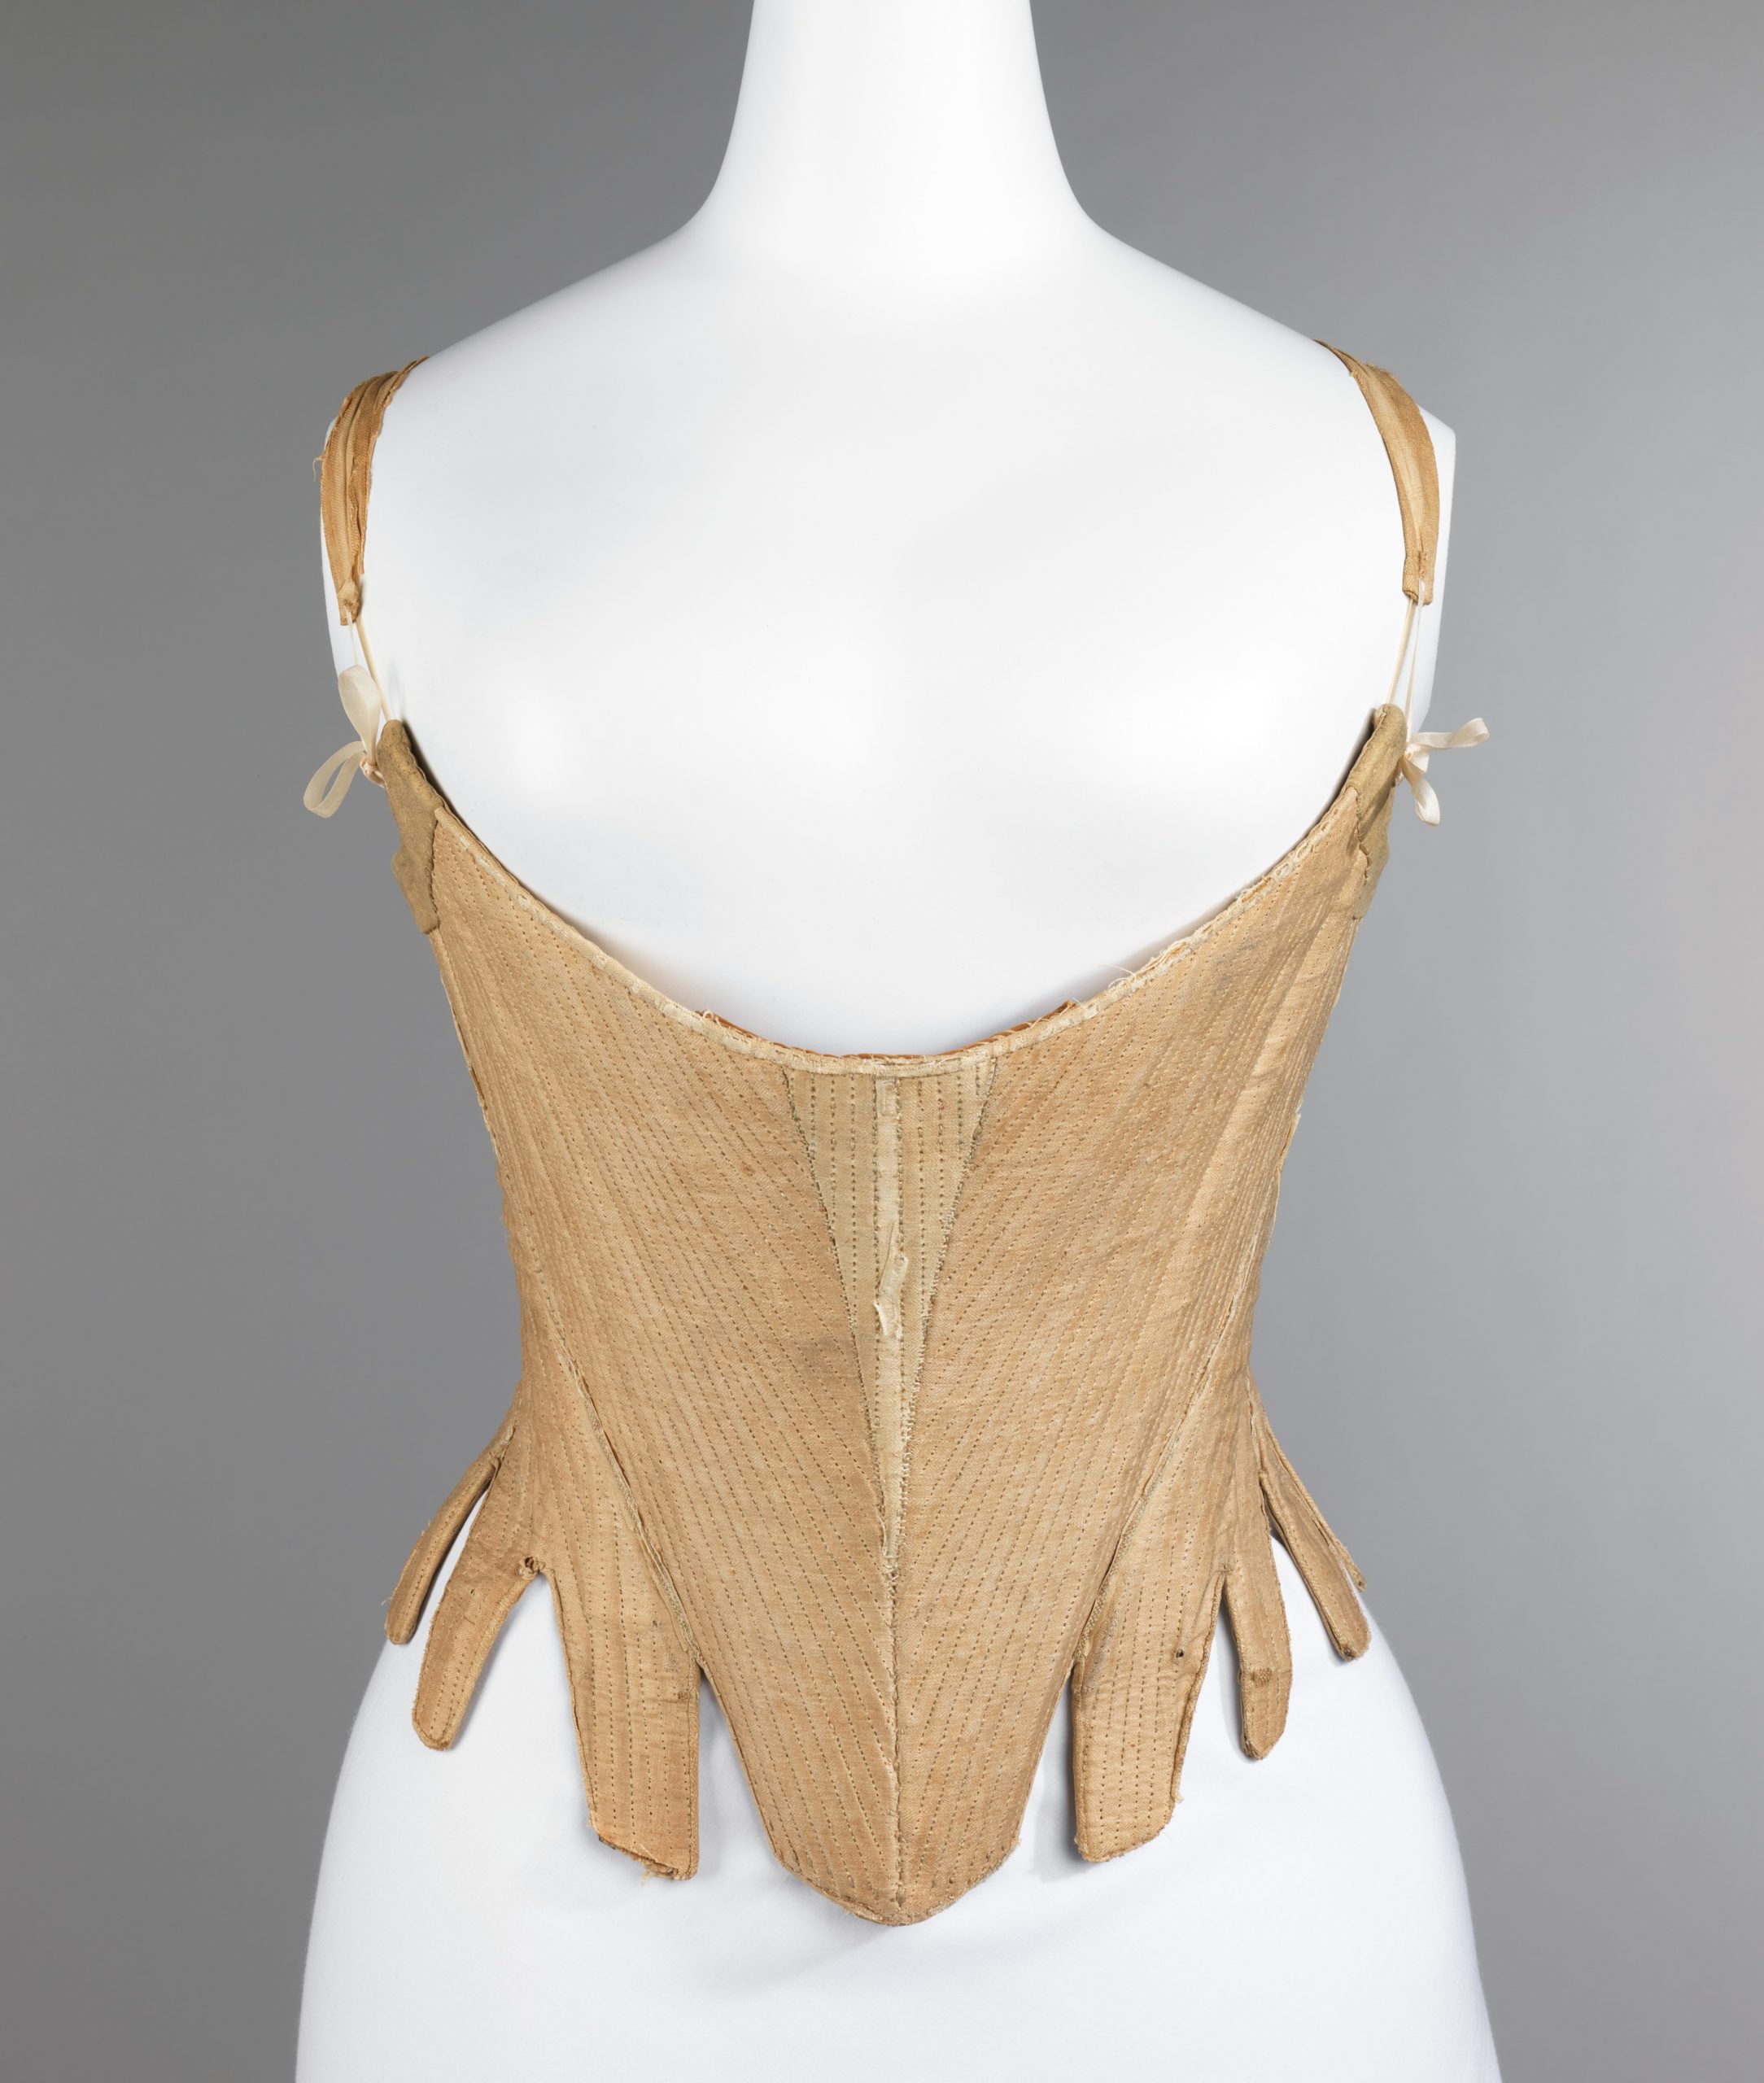 https://thedreamstress.com/wp-content/uploads/2024/02/Corset-1740%E2%80%9360-American-linen-leather-whalebone-Brooklyn-Museum-Costume-Collection-at-The-Metropolitan-Museum-of-Art-Gift-of-the-Jason-and-Peggy-Westerfield-Collection-1969-front-2009.300.3330a%E2%80%93d-scaled.jpg